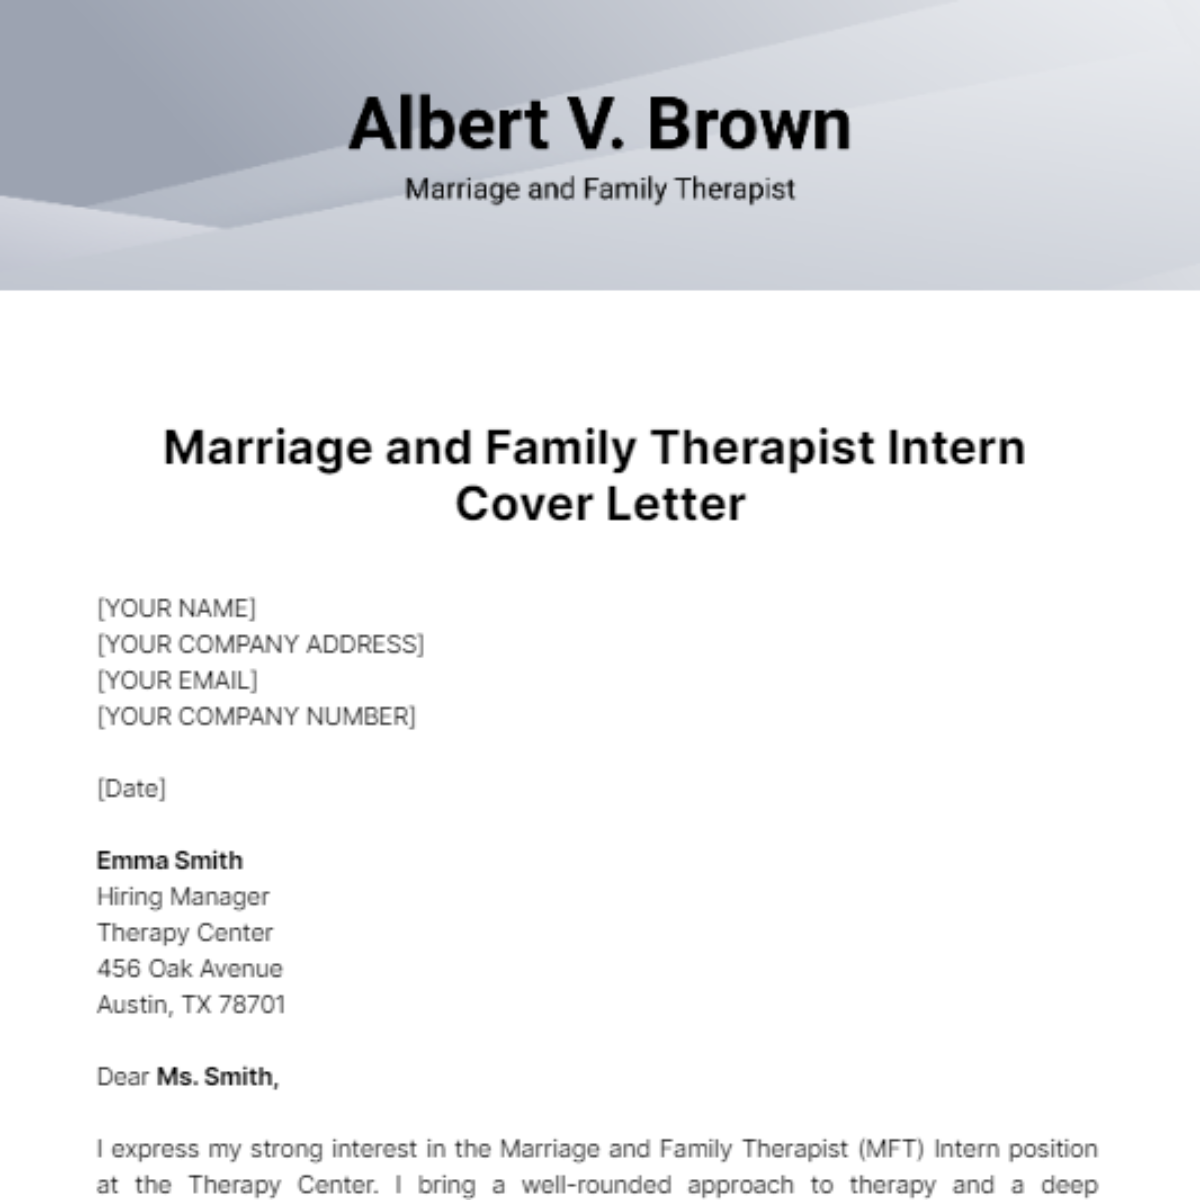 Marriage and Family Therapist (MFT) Intern Cover Letter Template